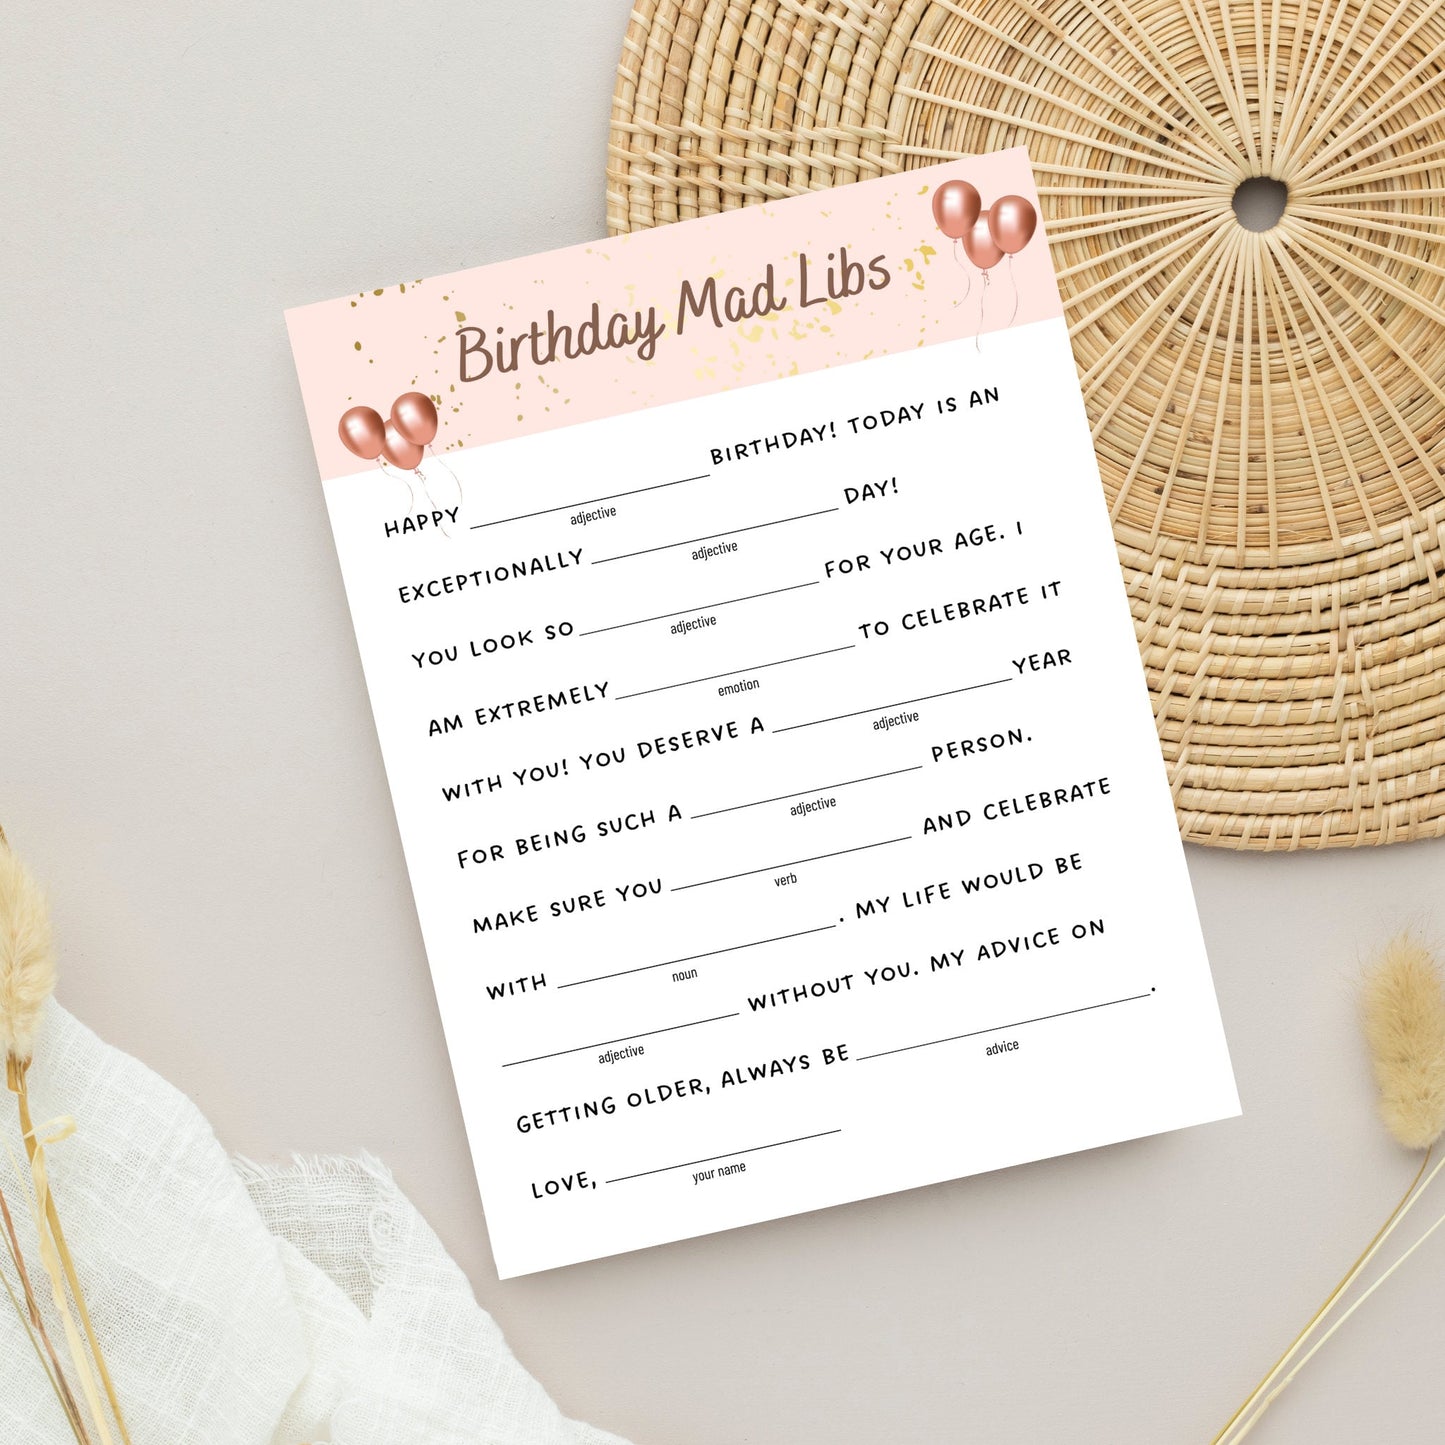 Teen Birthday Party Games Bundle, Birthday Games for Her Printable, Slumber Party Games, Sleepover Pajama Party Activities, 18 Trivia Games